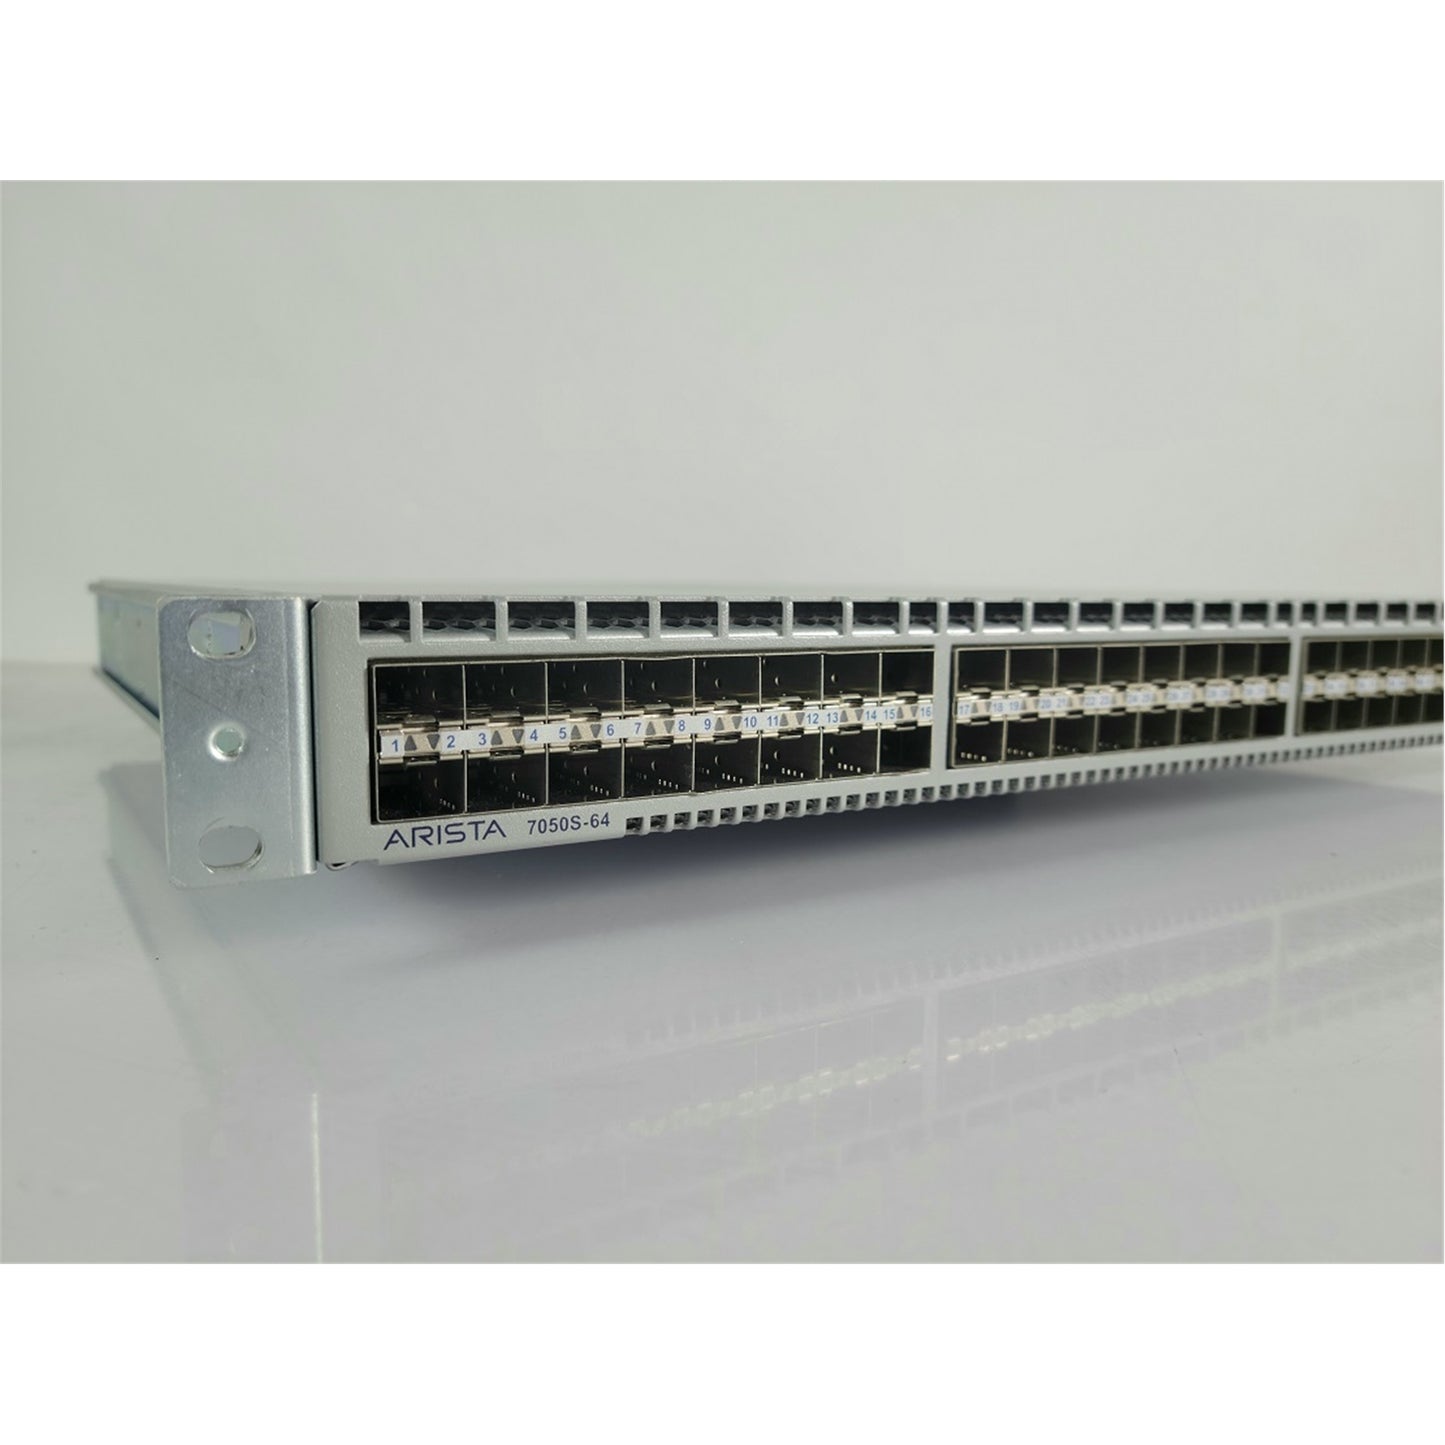 Arista DCS-7050S-64, 48x10GbE (SFP+) & 4xQSFP+ switch, chassis only (Used - Good)